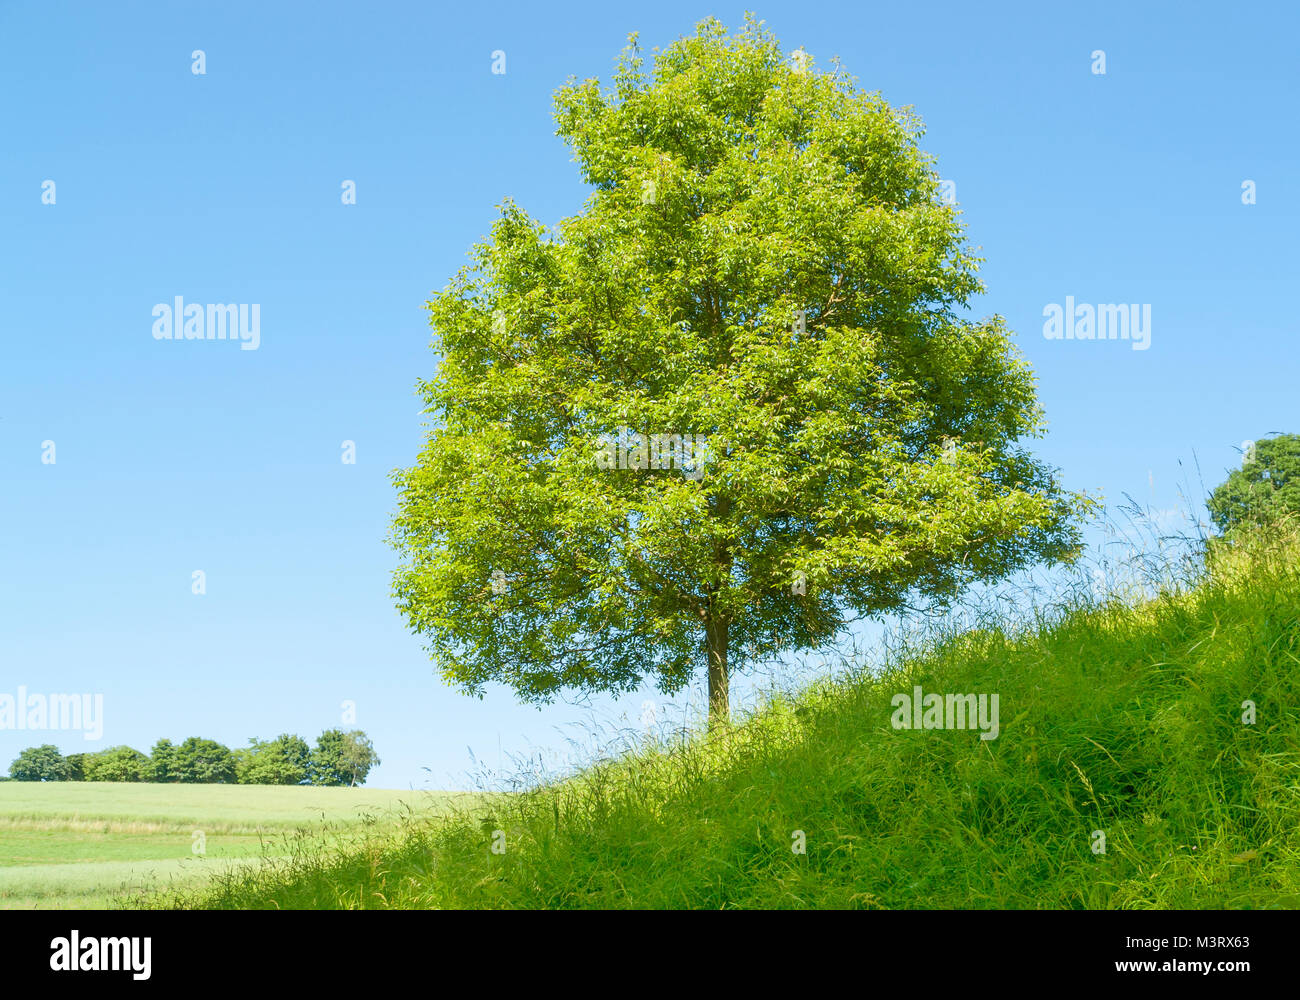 sunny single tree on a grassy overgrown hill slope at summer time Stock Photo